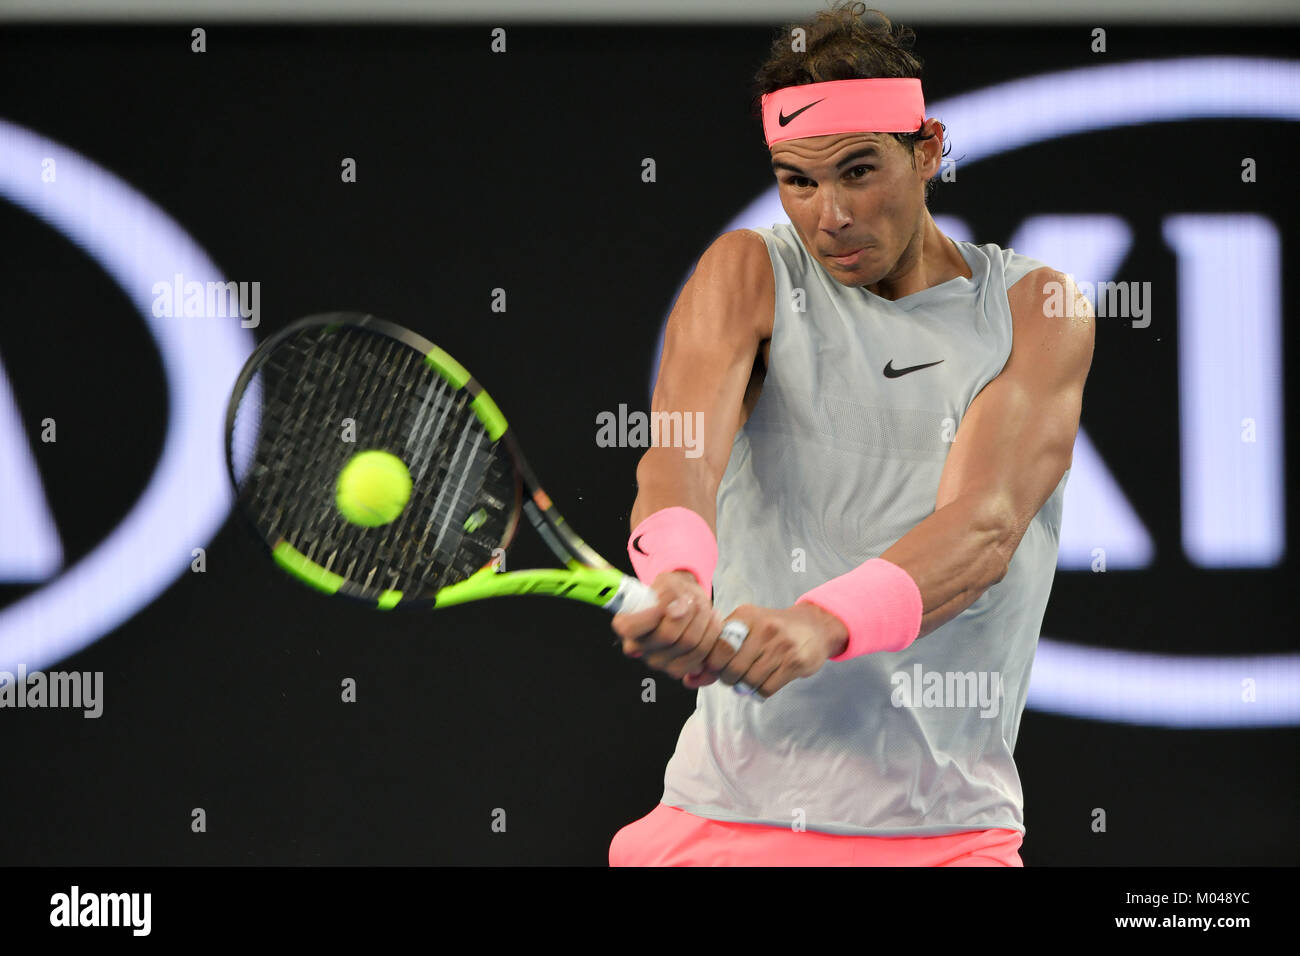 Melbourne, Australia. 19th Jan, 2018. 1st seed Rafael Nadal of Spain in action in a 3rd round match against Damir Dzumhur of Bosnia and Herzegovina on day five of the 2018 Australian Open Grand Slam tennis tournament in Melbourne, Australia. Nadal won 61 63 61. Credit: Cal Sport Media/Alamy Live News Stock Photo